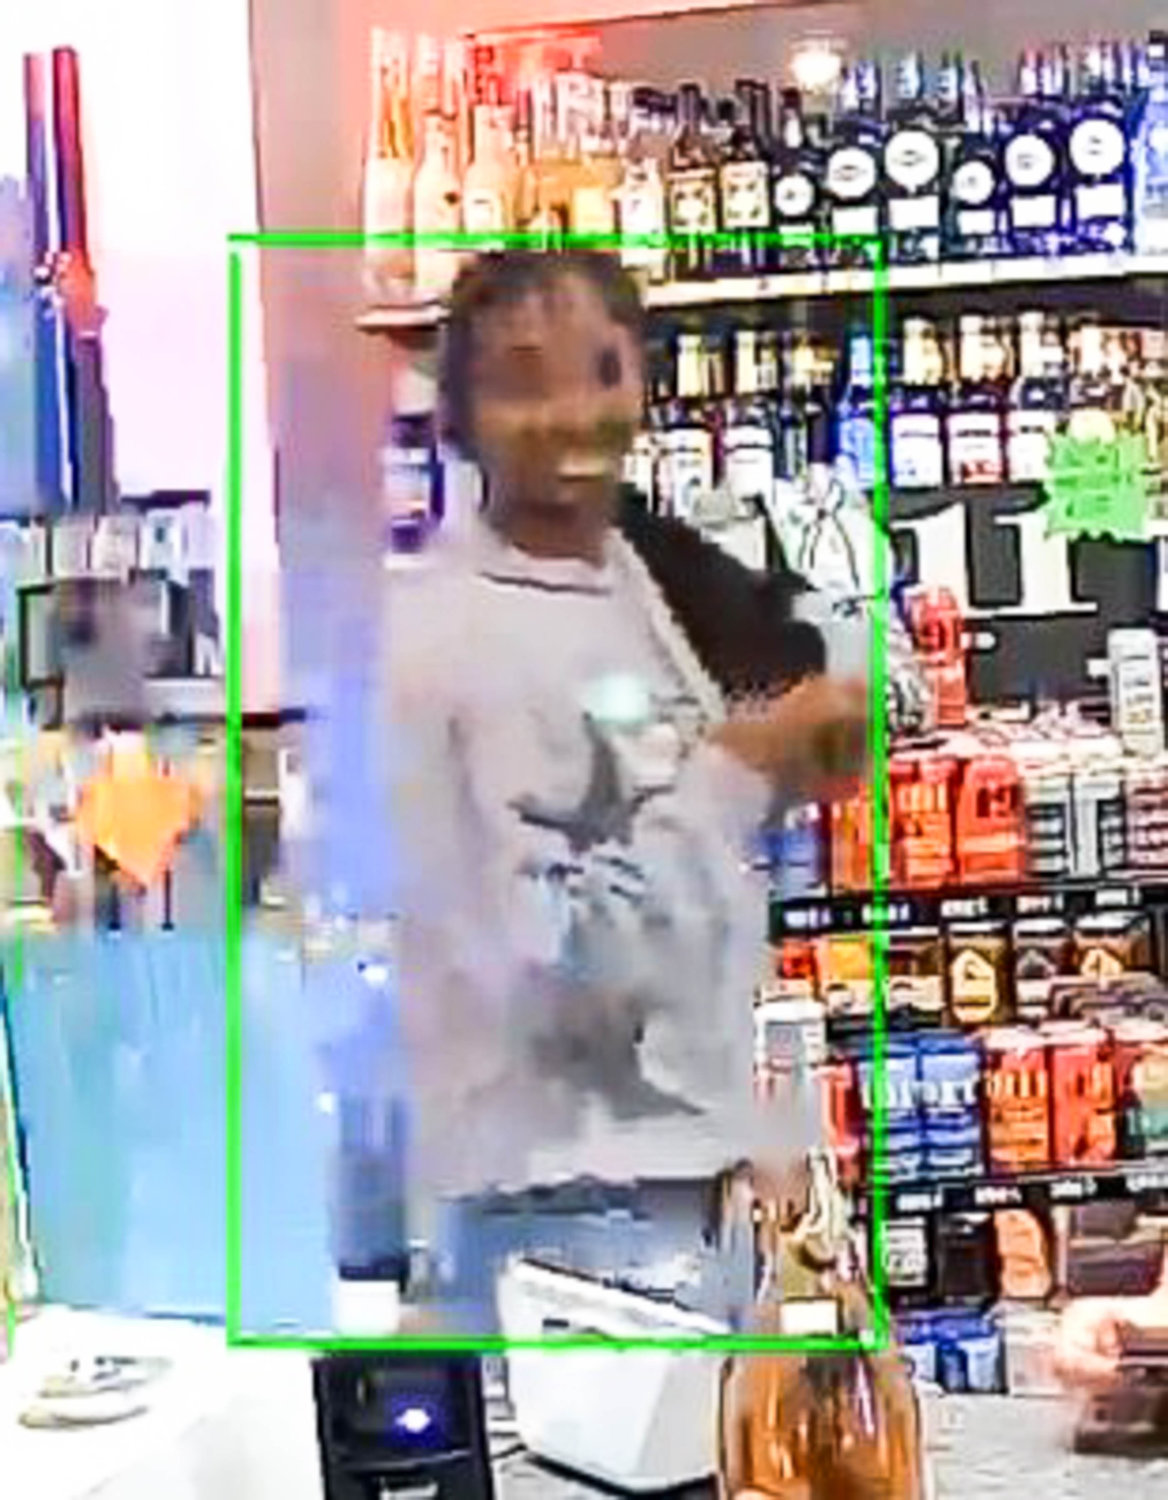 If you recognize this suspect from a shoplifting incident at Blue Truck Wine &amp; Liquor in Utica you are asked to contact the Utica Police Criminal Investigations Division at 315-223-3510.